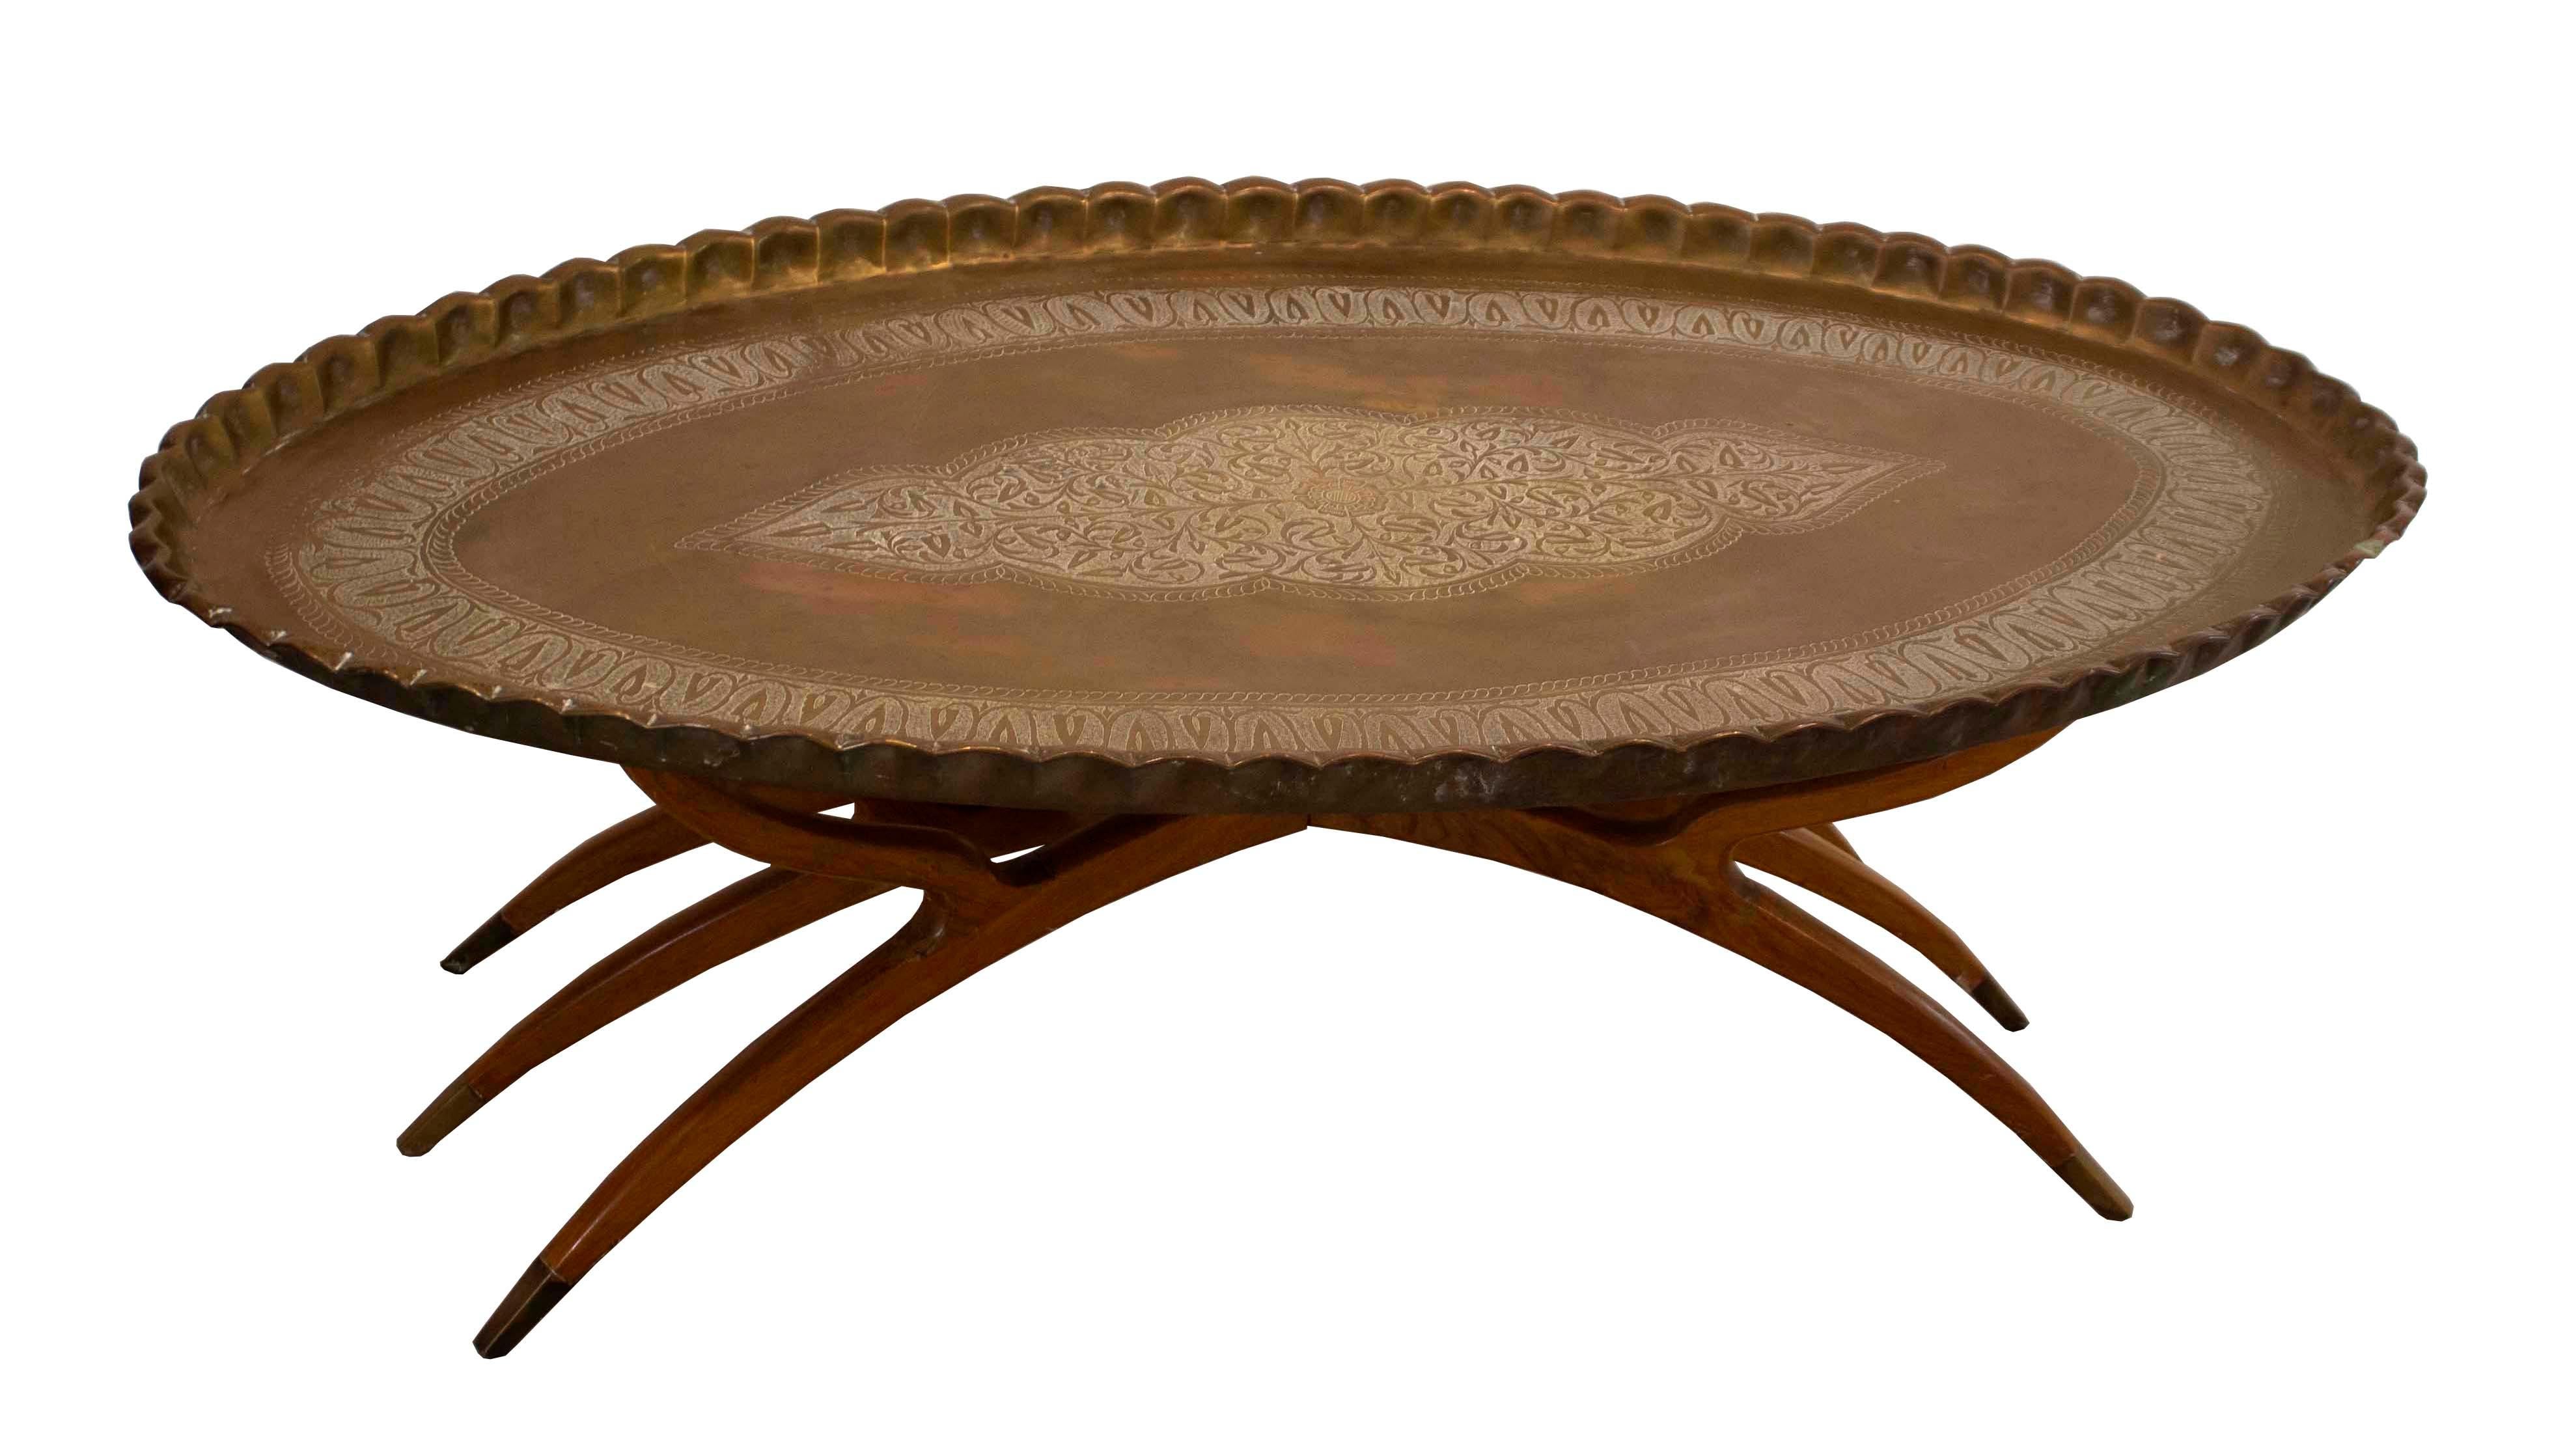 Up for consideration is Bohemian coffee table with collapsible walnut spider leg base and paired with its original Moroccan, hand-hammered 'pie' edge tray top, intricately carved. This look dovetails nicely with a wide range of styles from